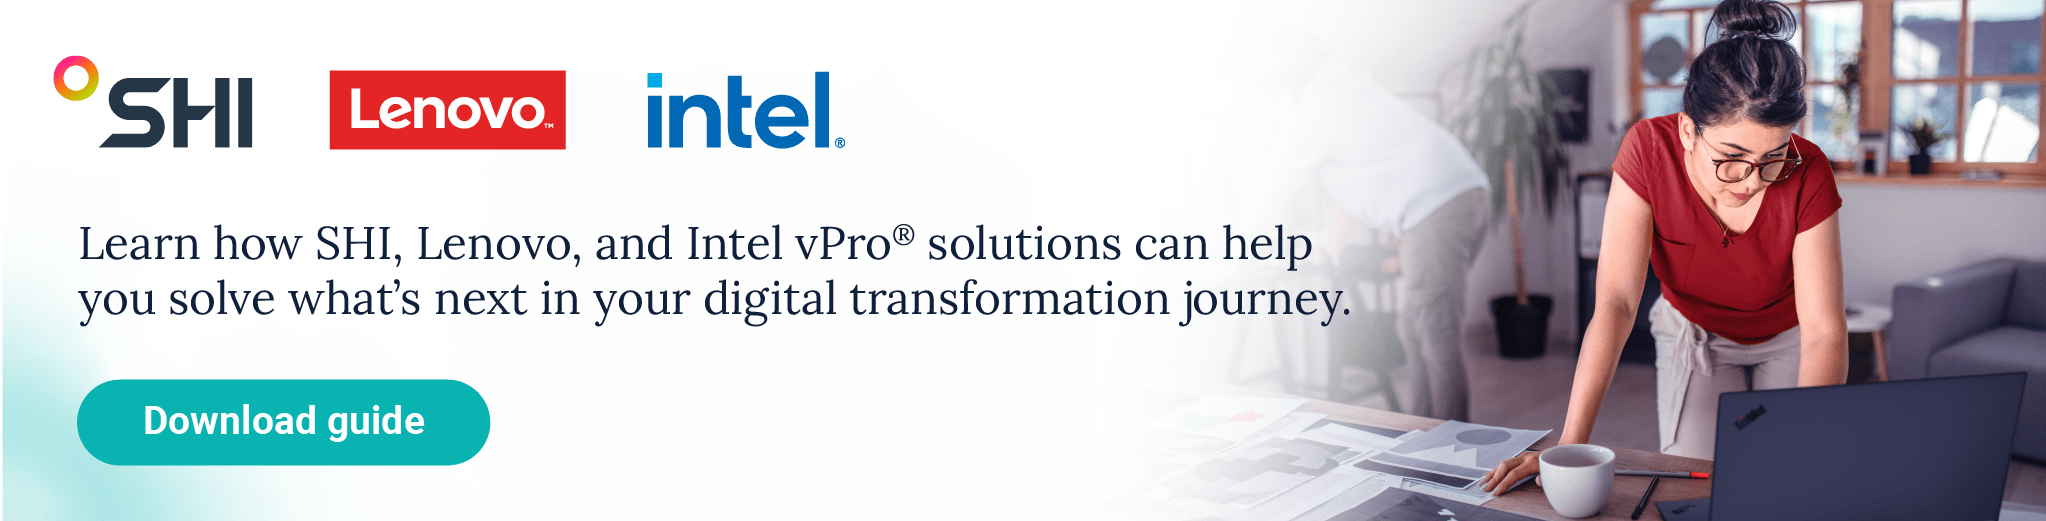 Banner that says "Learn how SHI, Lenovo, and Intel vPro solutions can help you solve what's next in your digital transformation journey", with a button to download guide